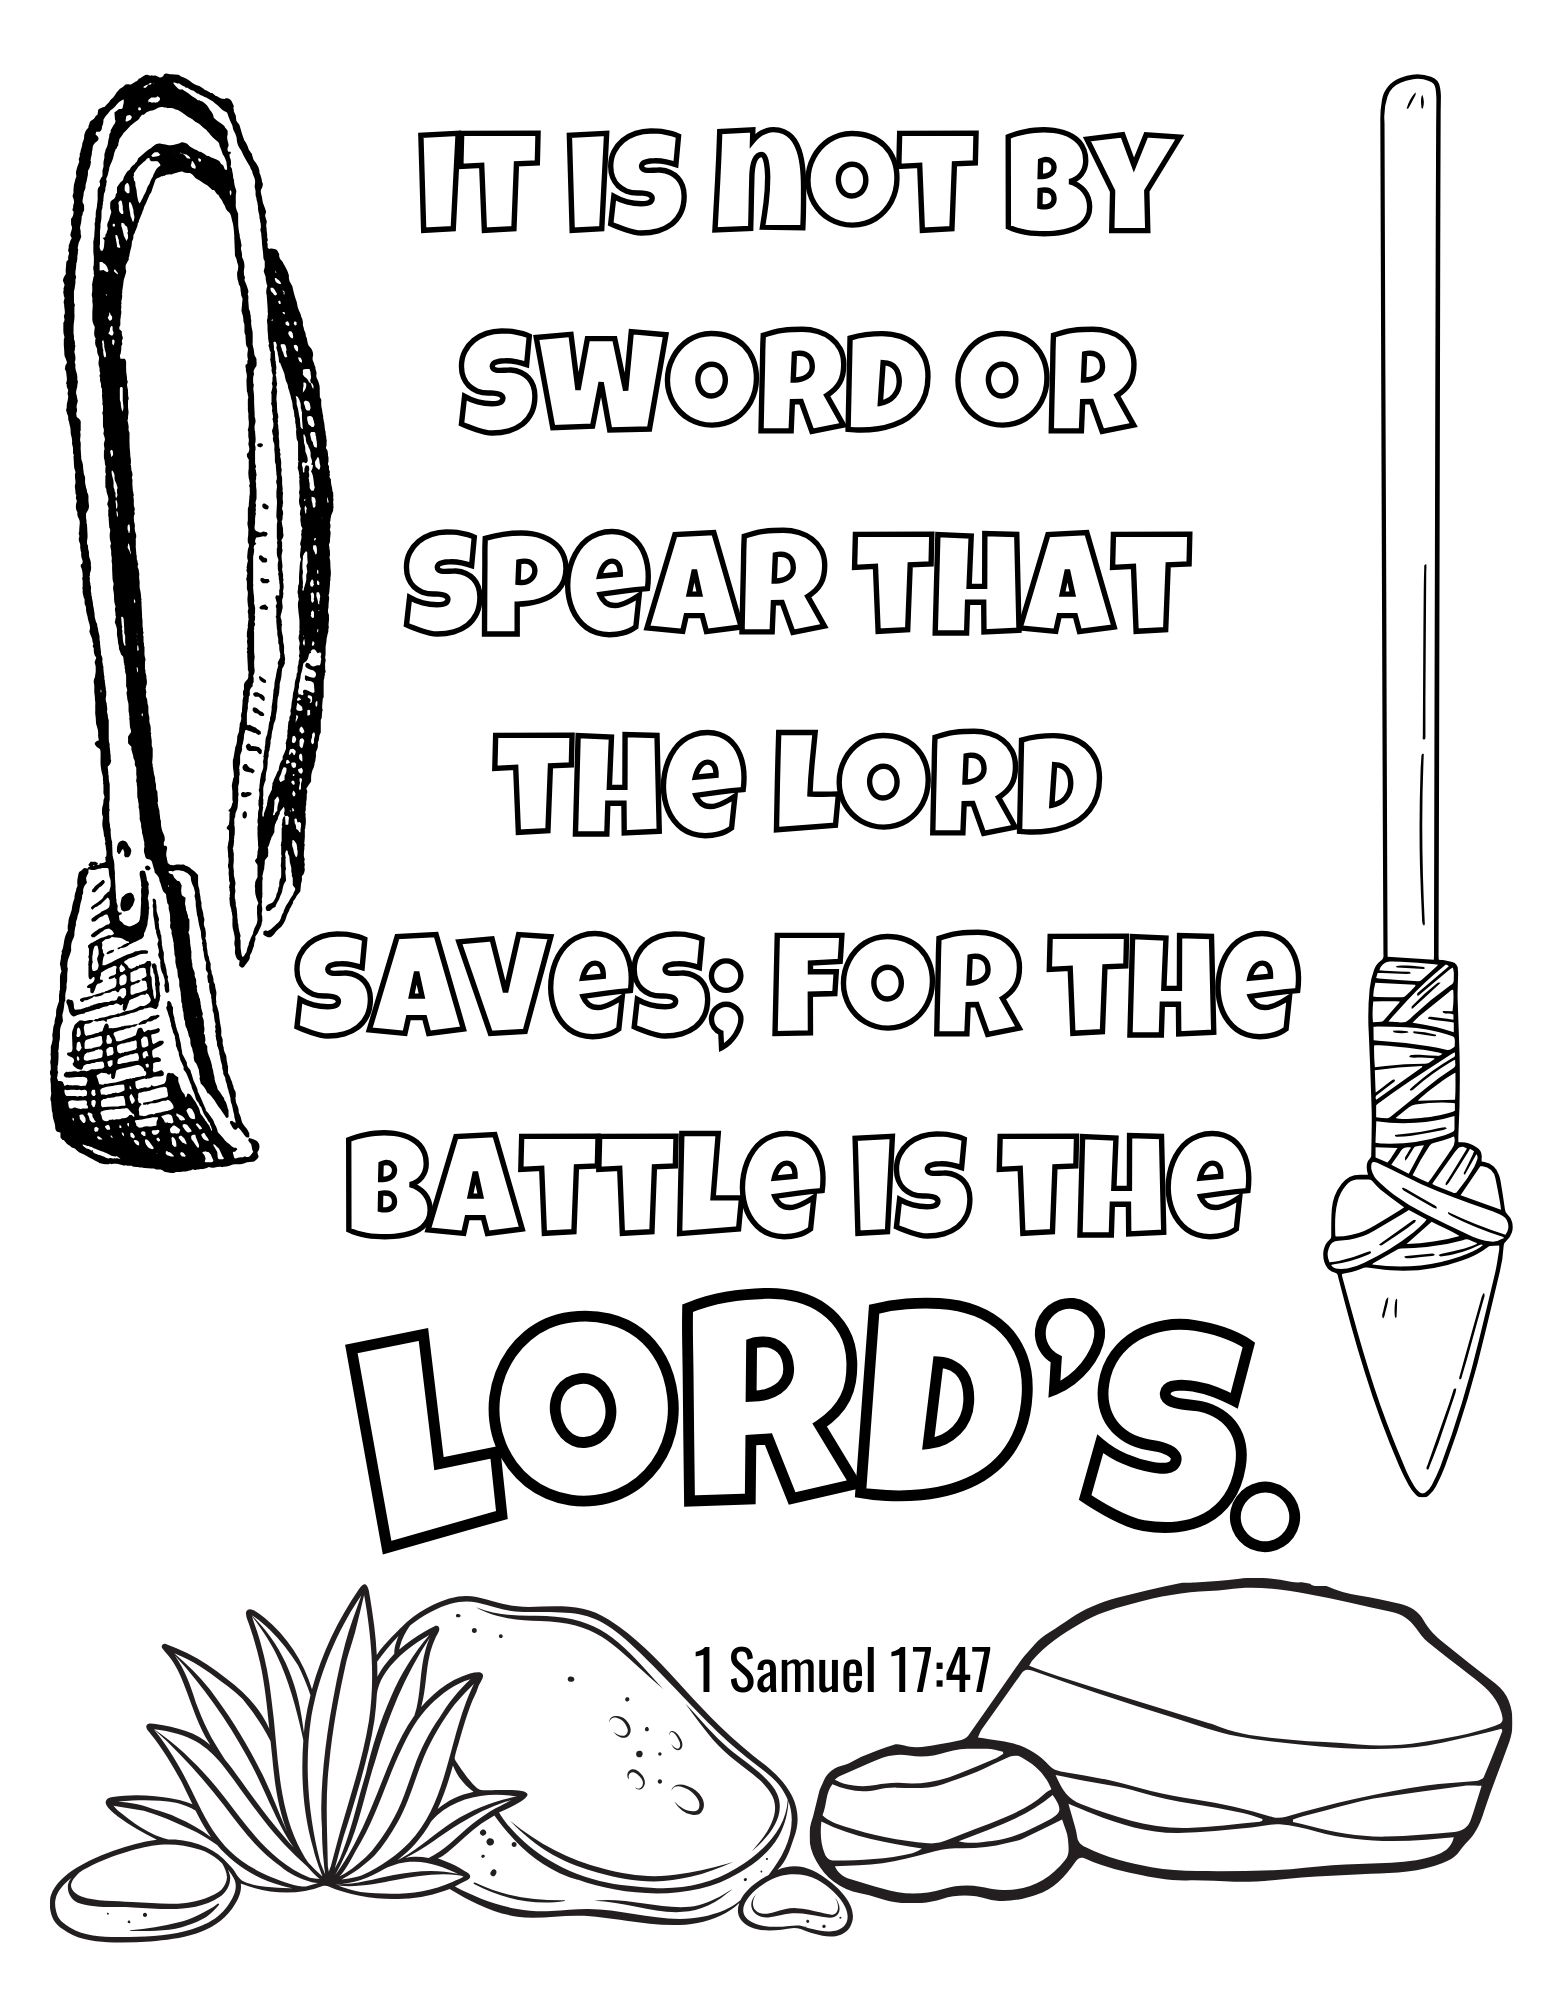 David and Goliath coloring page with the text of 1 Samuel 17:42, stones, a sling, and a spear.